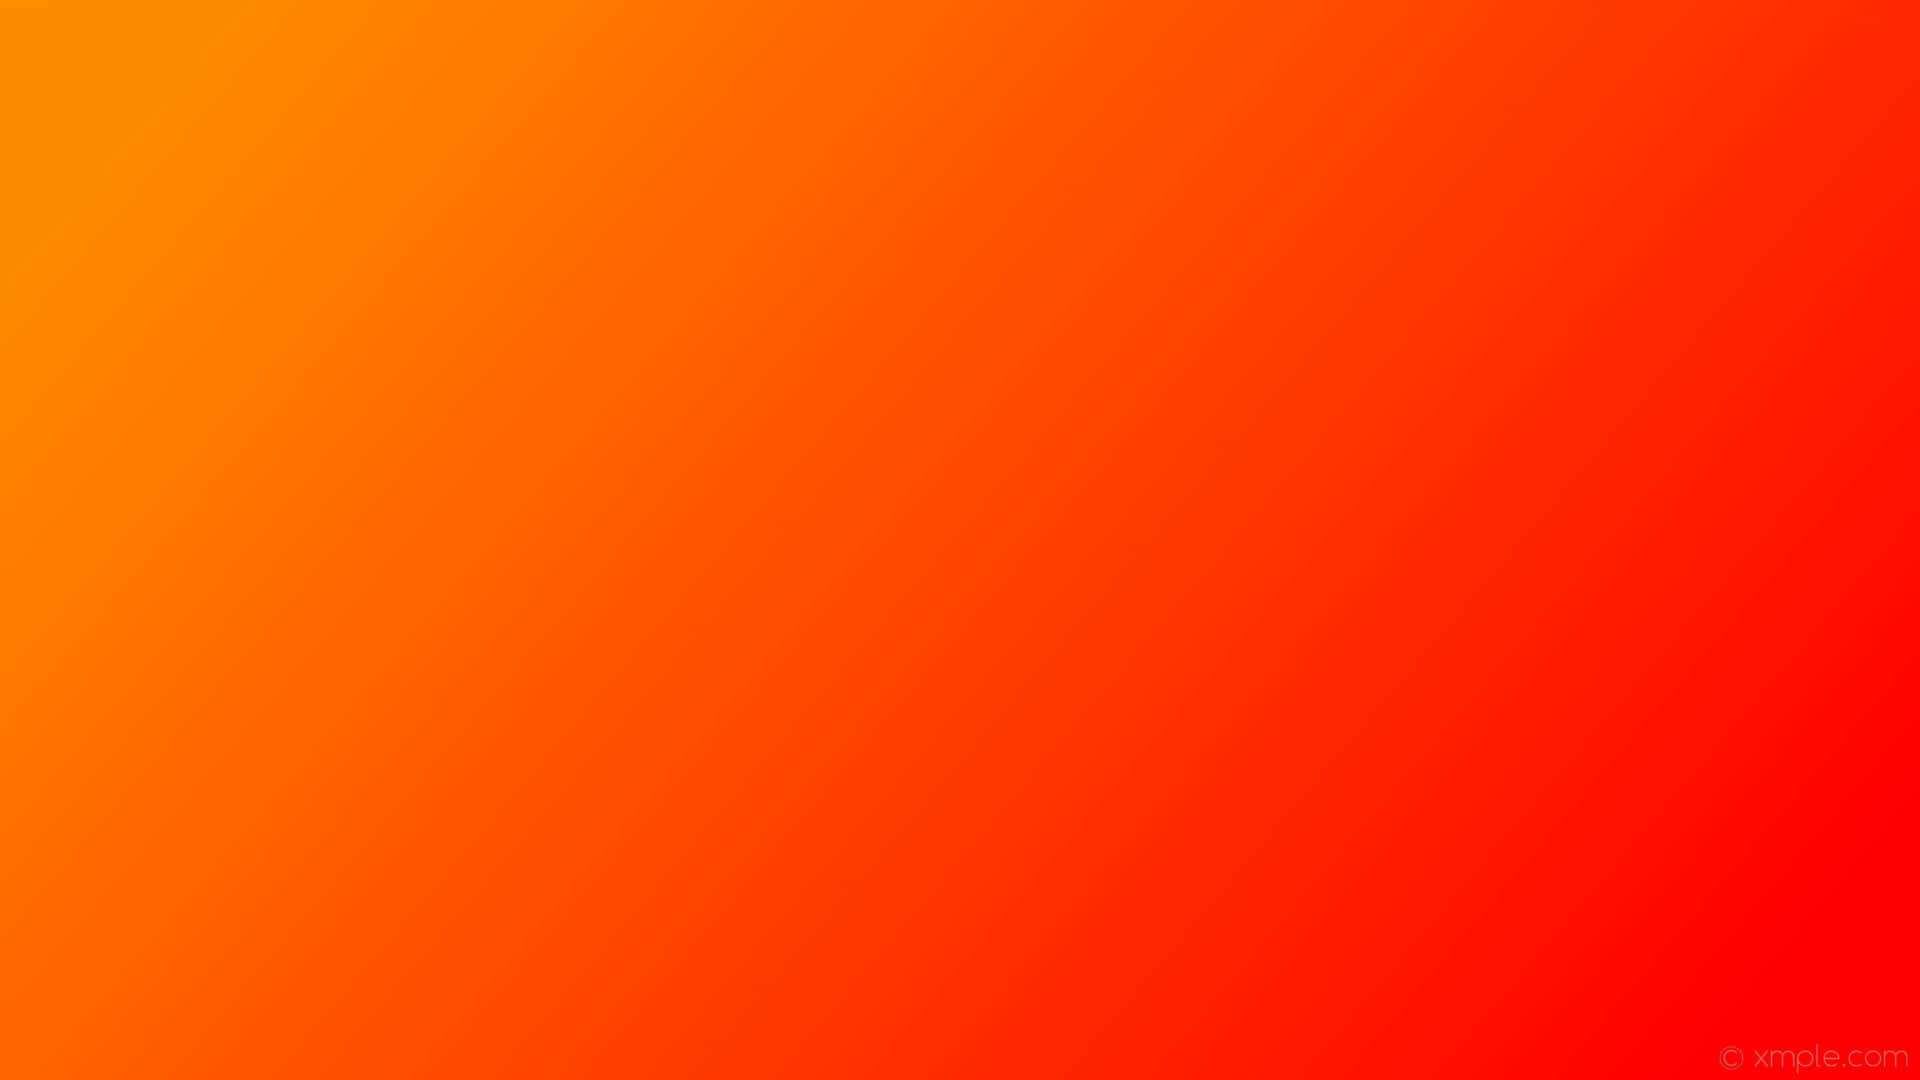 An Orange And Red Background With A Gradient Wallpaper